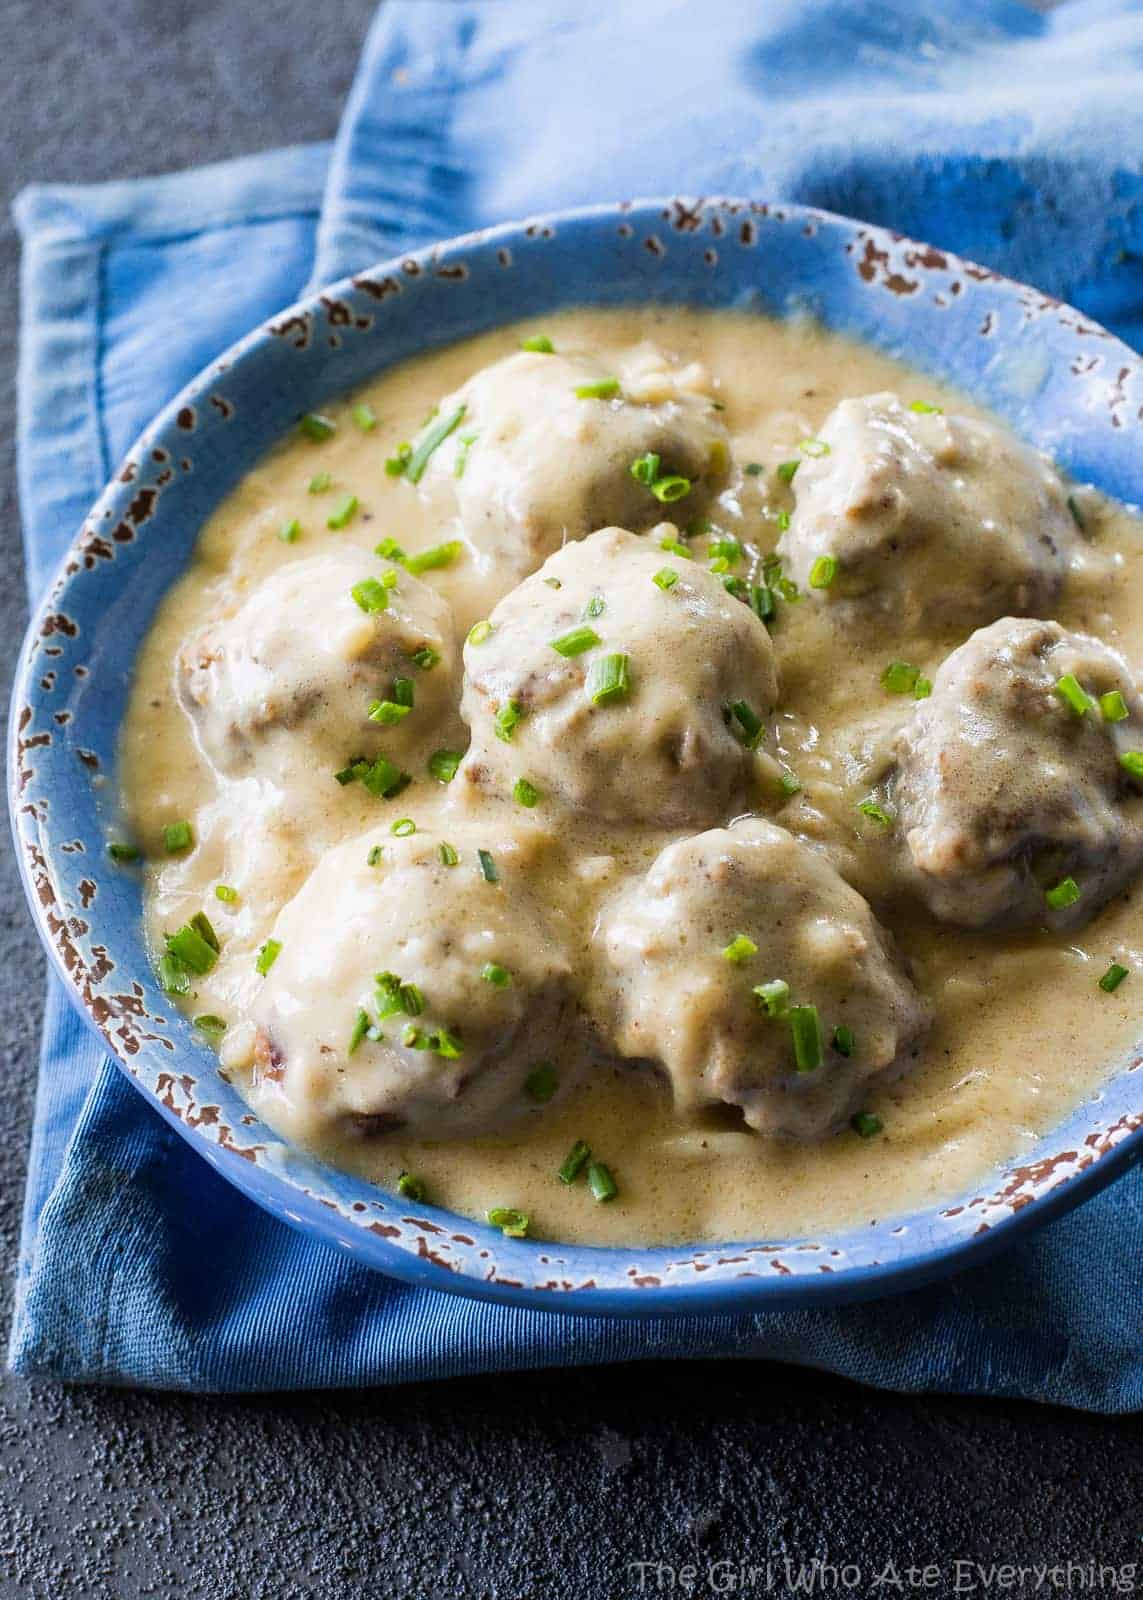 https://www.the-girl-who-ate-everything.com/wp-content/uploads/2016/10/swedish-meatballs-7.jpg